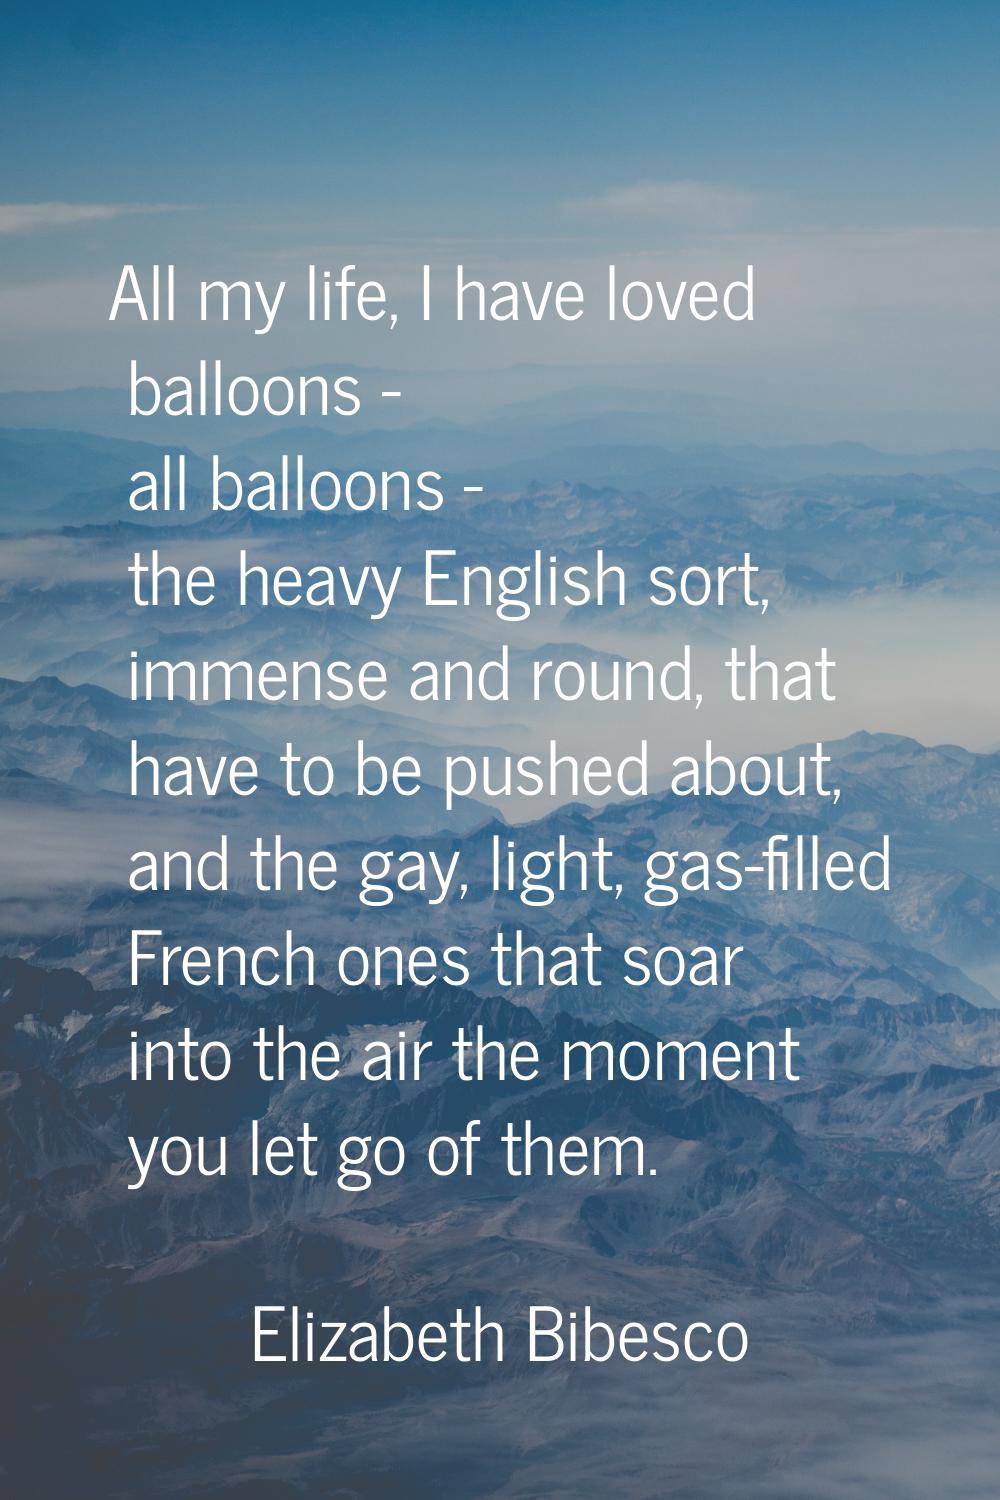 All my life, I have loved balloons - all balloons - the heavy English sort, immense and round, that